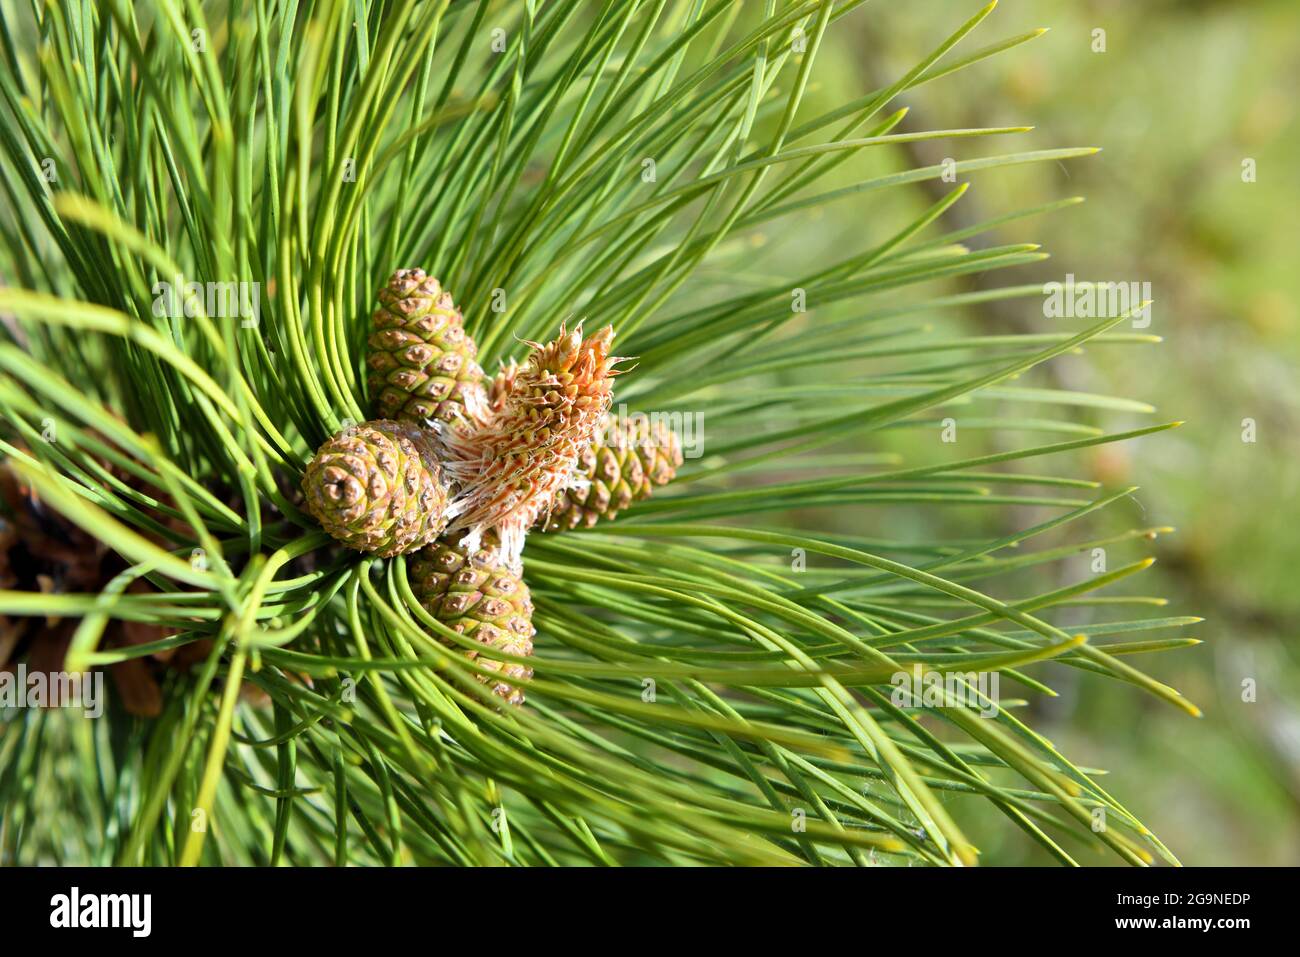 The new spring shoots of evergreen tree Pine (Pinus Sylvestris) with young yellow conifer cones candles and pollen flowers. Blooming Pine branch close Stock Photo